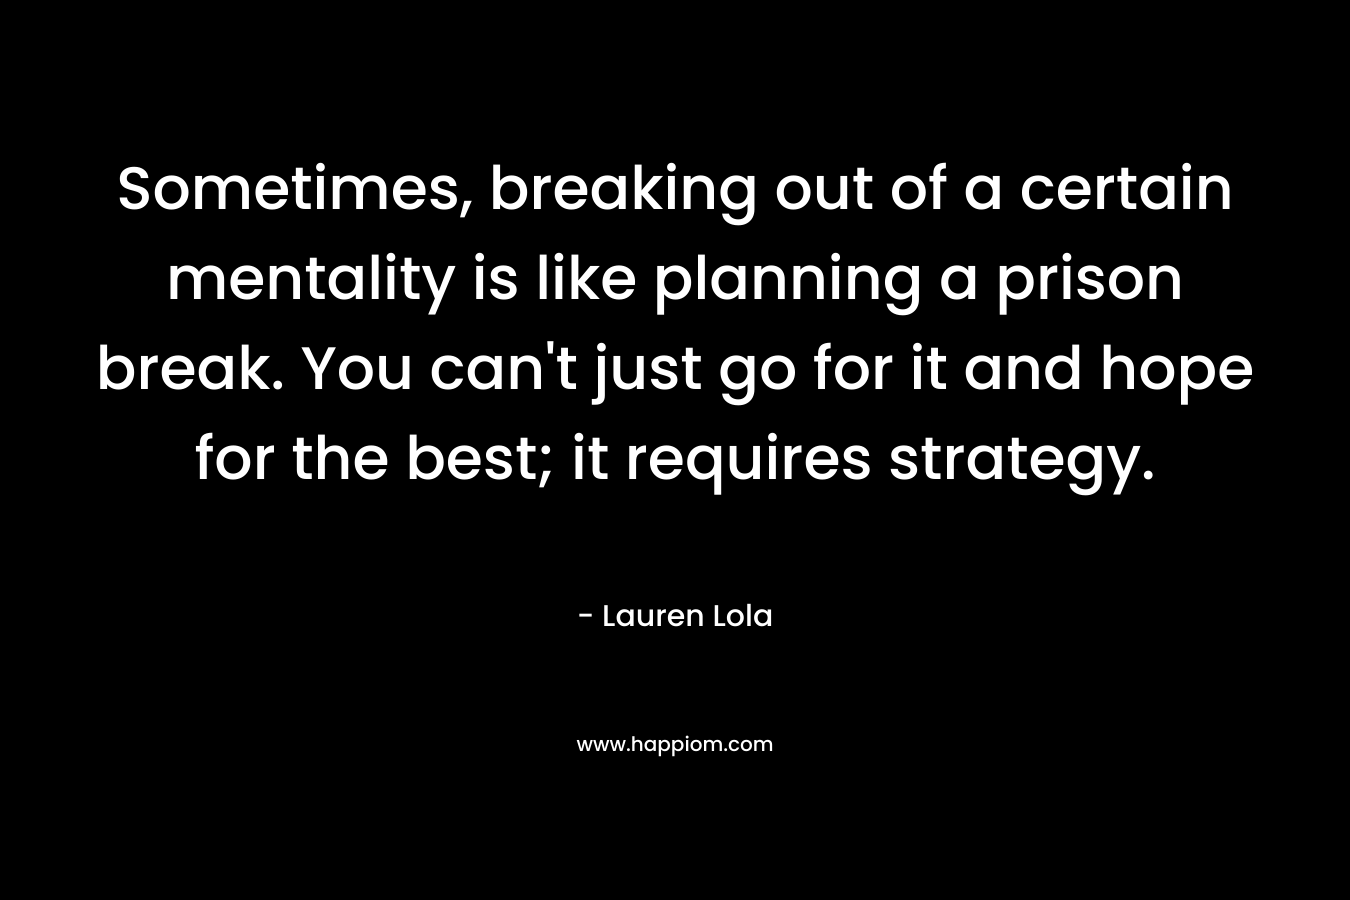 Sometimes, breaking out of a certain mentality is like planning a prison break. You can’t just go for it and hope for the best; it requires strategy. – Lauren Lola